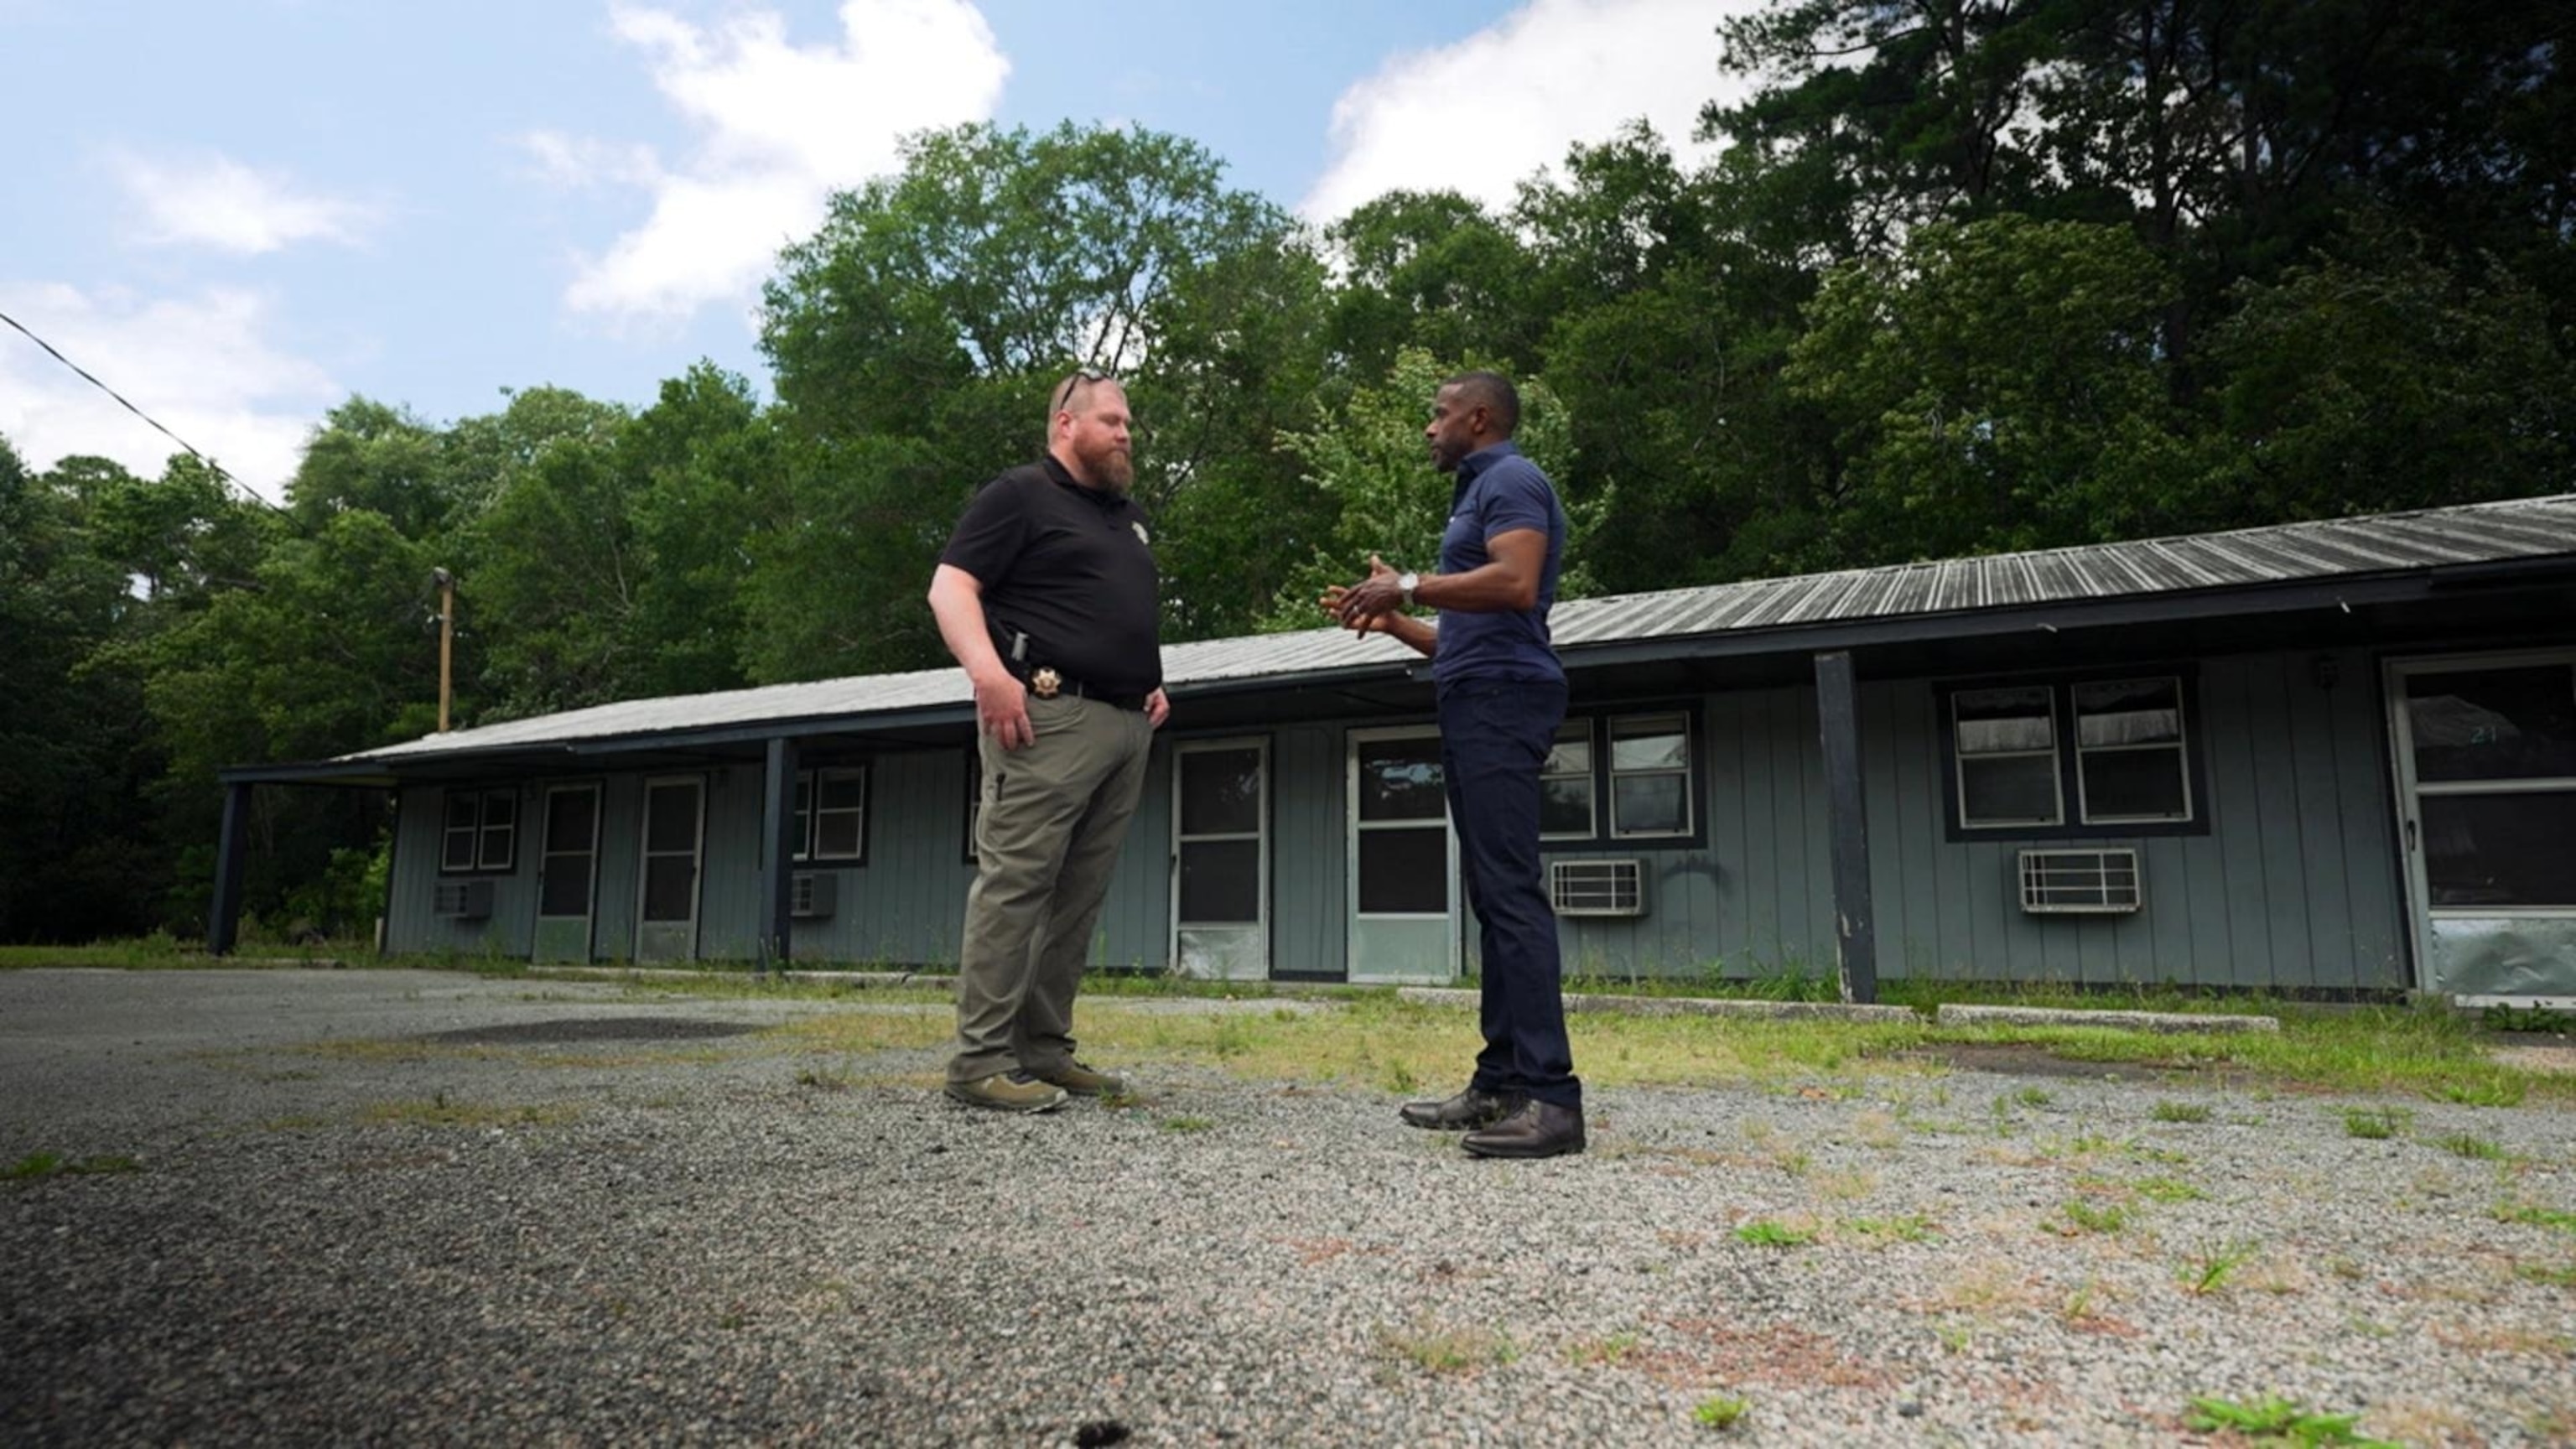 PHOTO: ABC News’ Ryan Smith interviews Hank Carrison, Senior Investigator at Georgetown County Sheriff's Office, at the motel where Raymond Moody lived. 